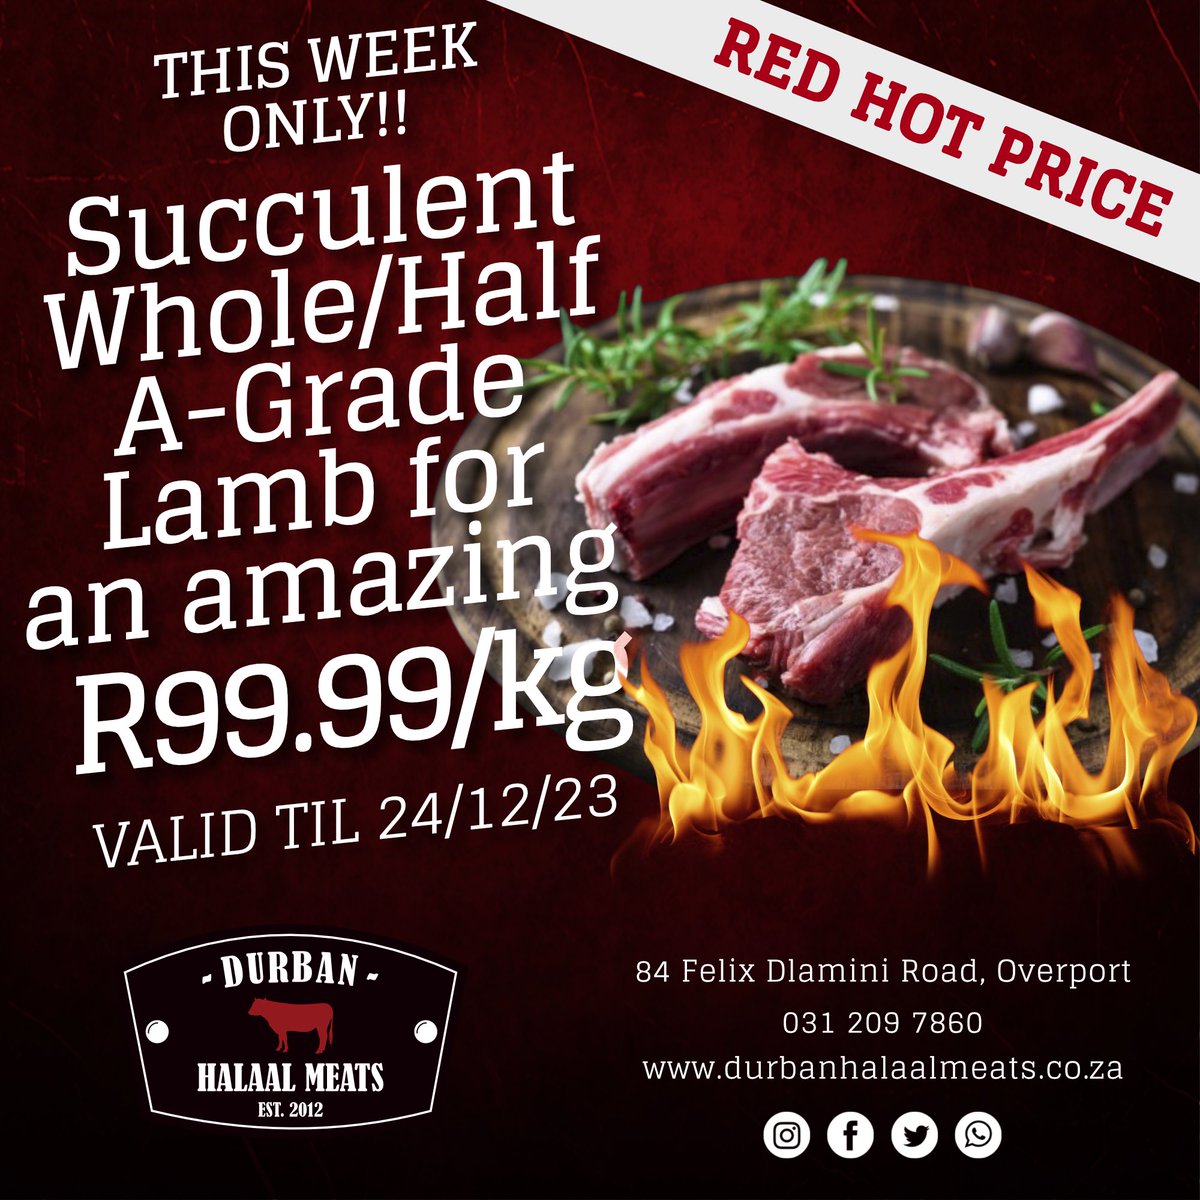 Indulge in the finest cuts for your gatherings! Elevate your meals with our premium A-Grade Whole/Half Lamb, now available at the amazing price of R99.99/kg. 

#SpecialOffer #PremiumMeats #QualityCuts #DurbanHalaalMeats #SavingsGalore #FlavourfulFeast #SizzleAndSave 🍖✨